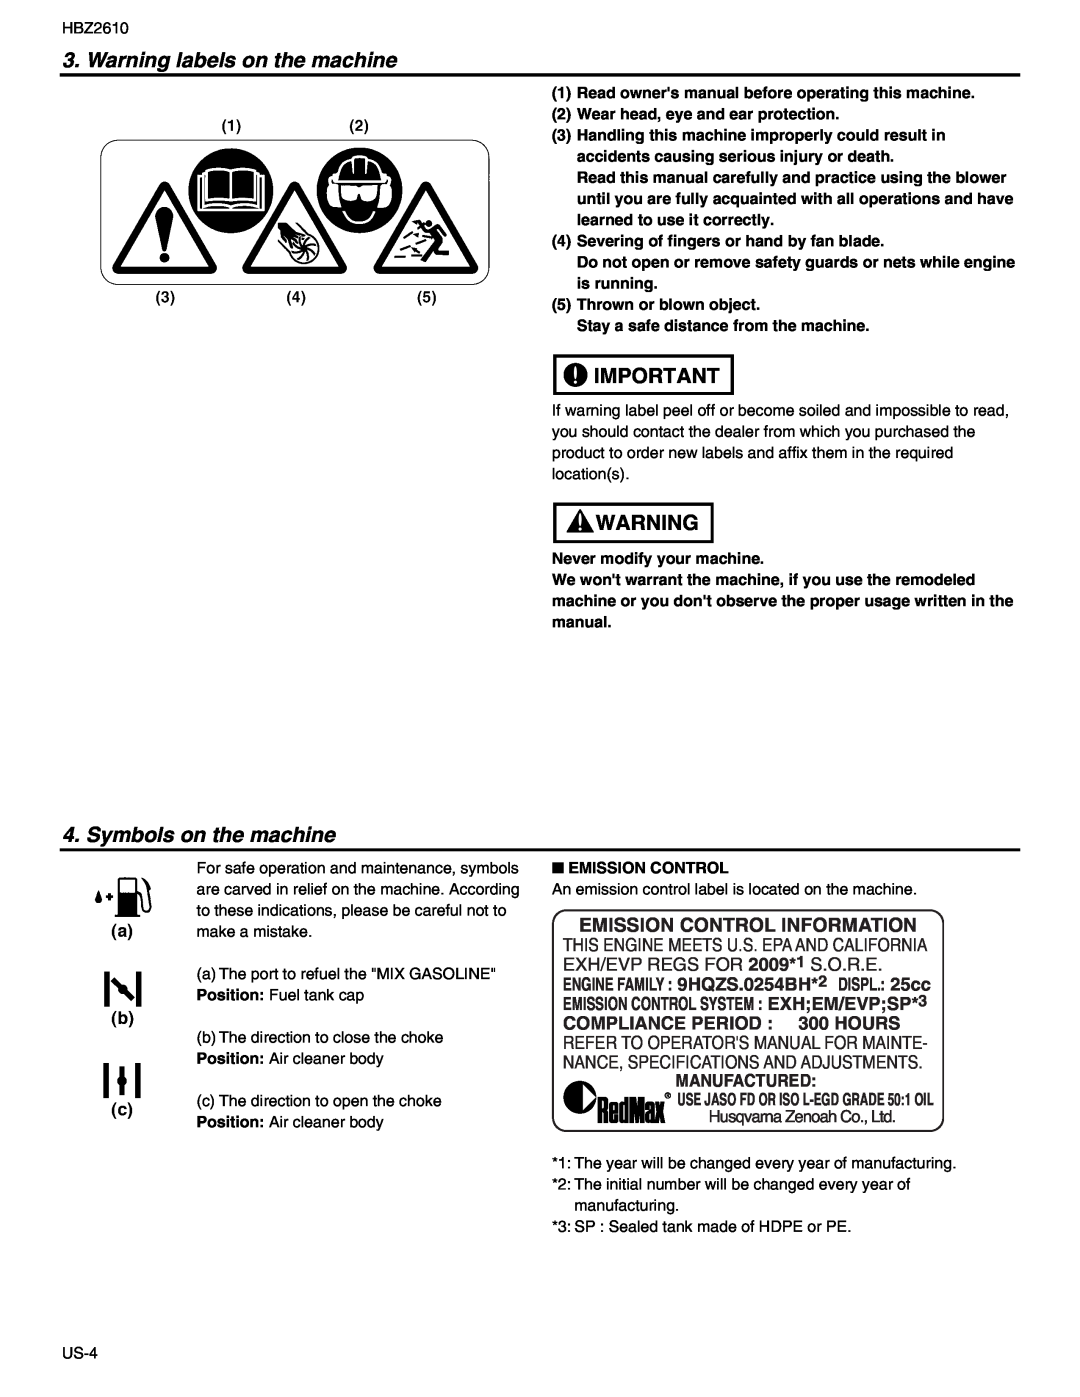 RedMax HBZ2610 Warning labels on the machine, Symbols on the machine, Manufactured, USE JASO FD OR ISO L-EGDGRADE 50 1 OIL 